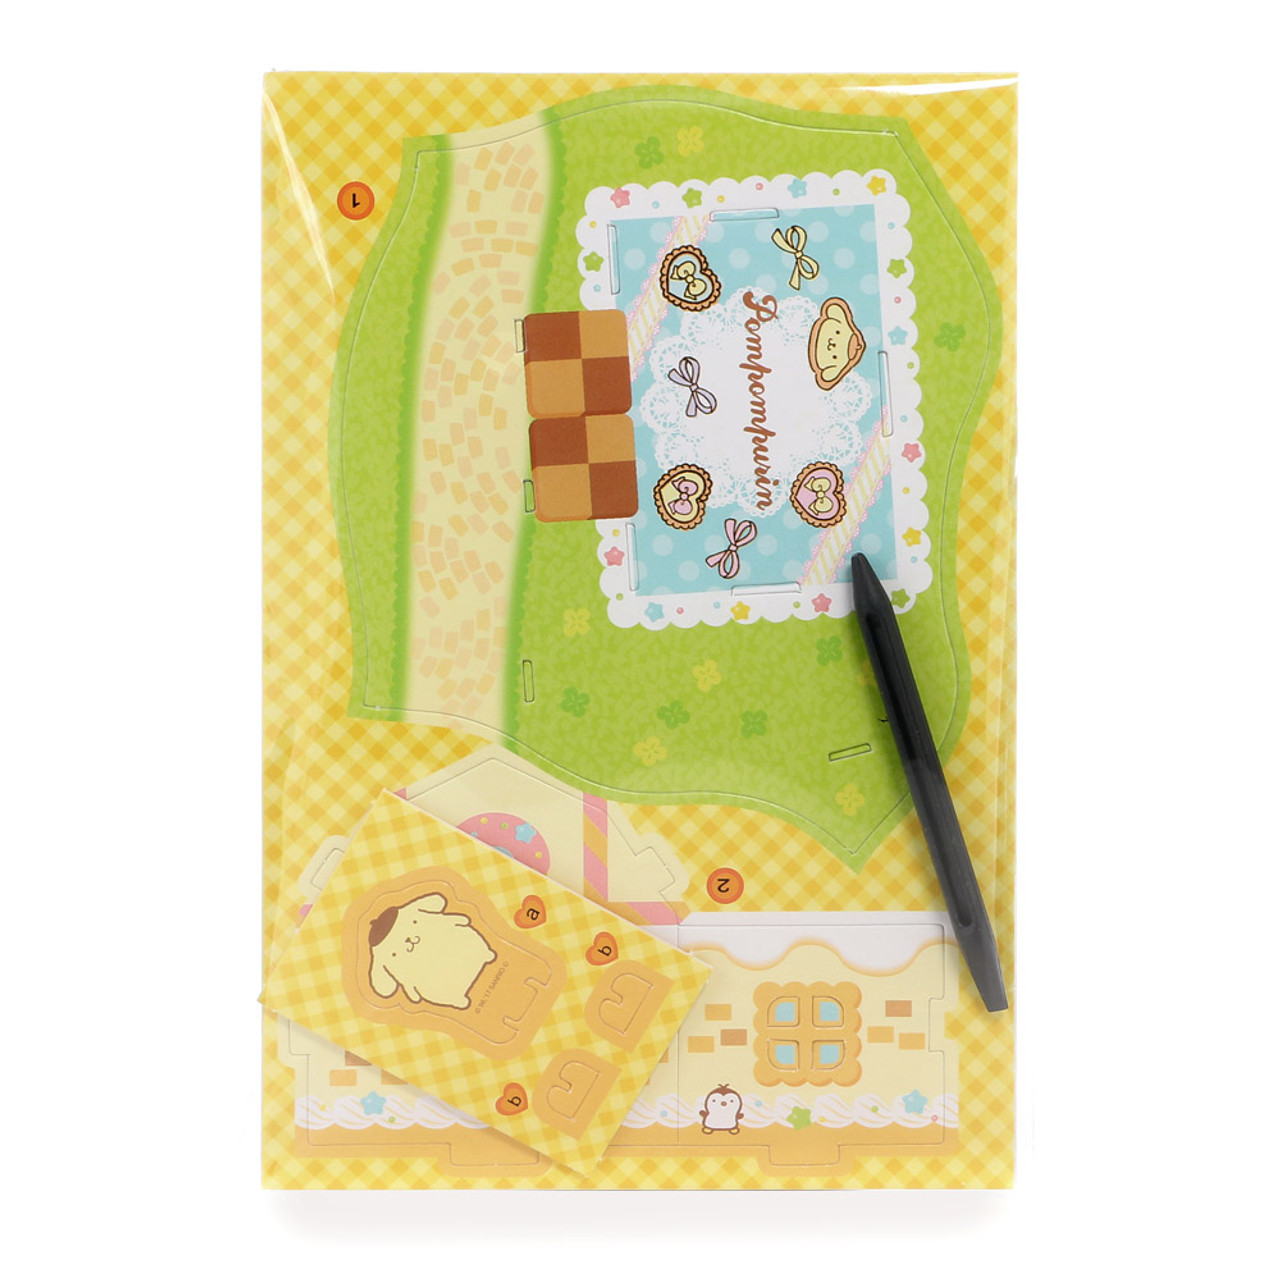 Sanrio Pompompurin 's House Garden Assembly Toy Puzzle ( Inner Packing View )